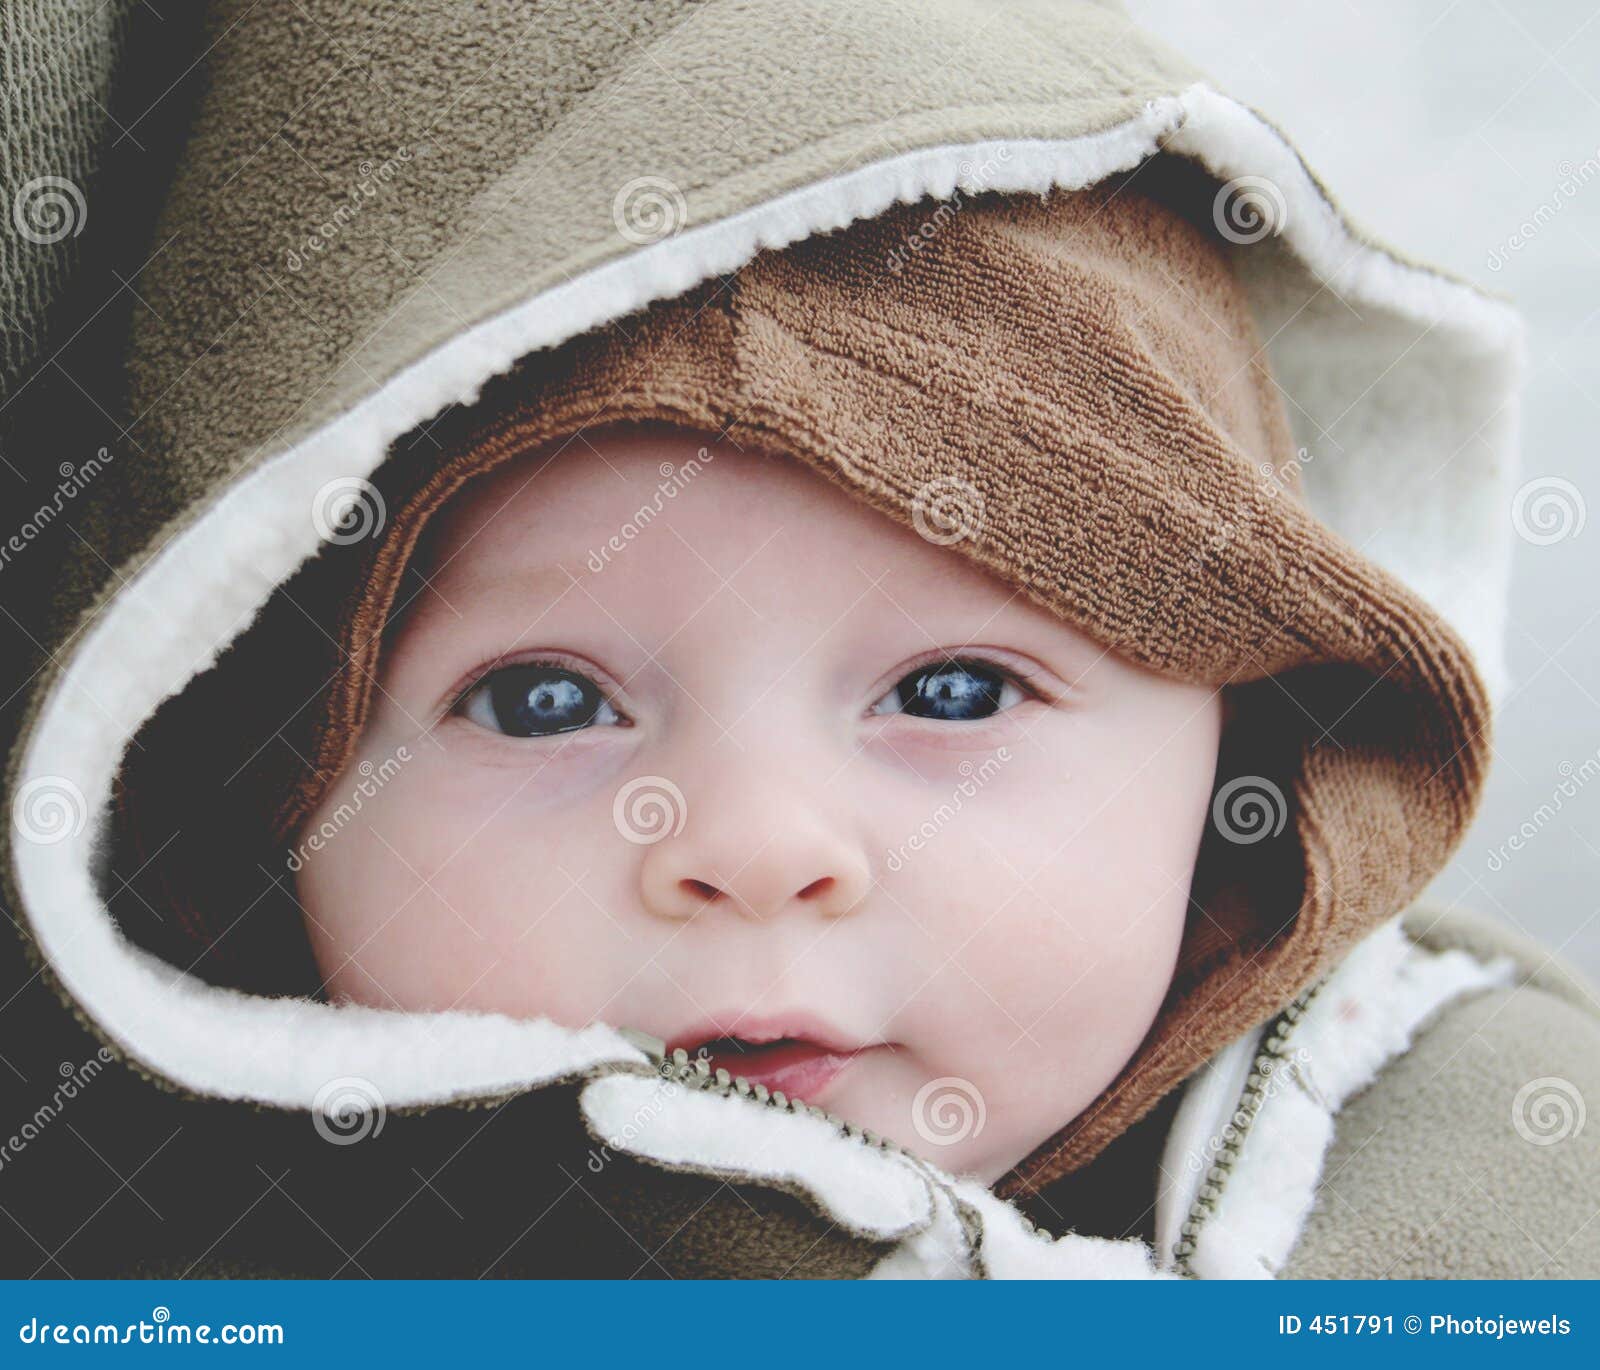 Baby stock image. Image of baby, cold, hood, eyes, infant - 451791